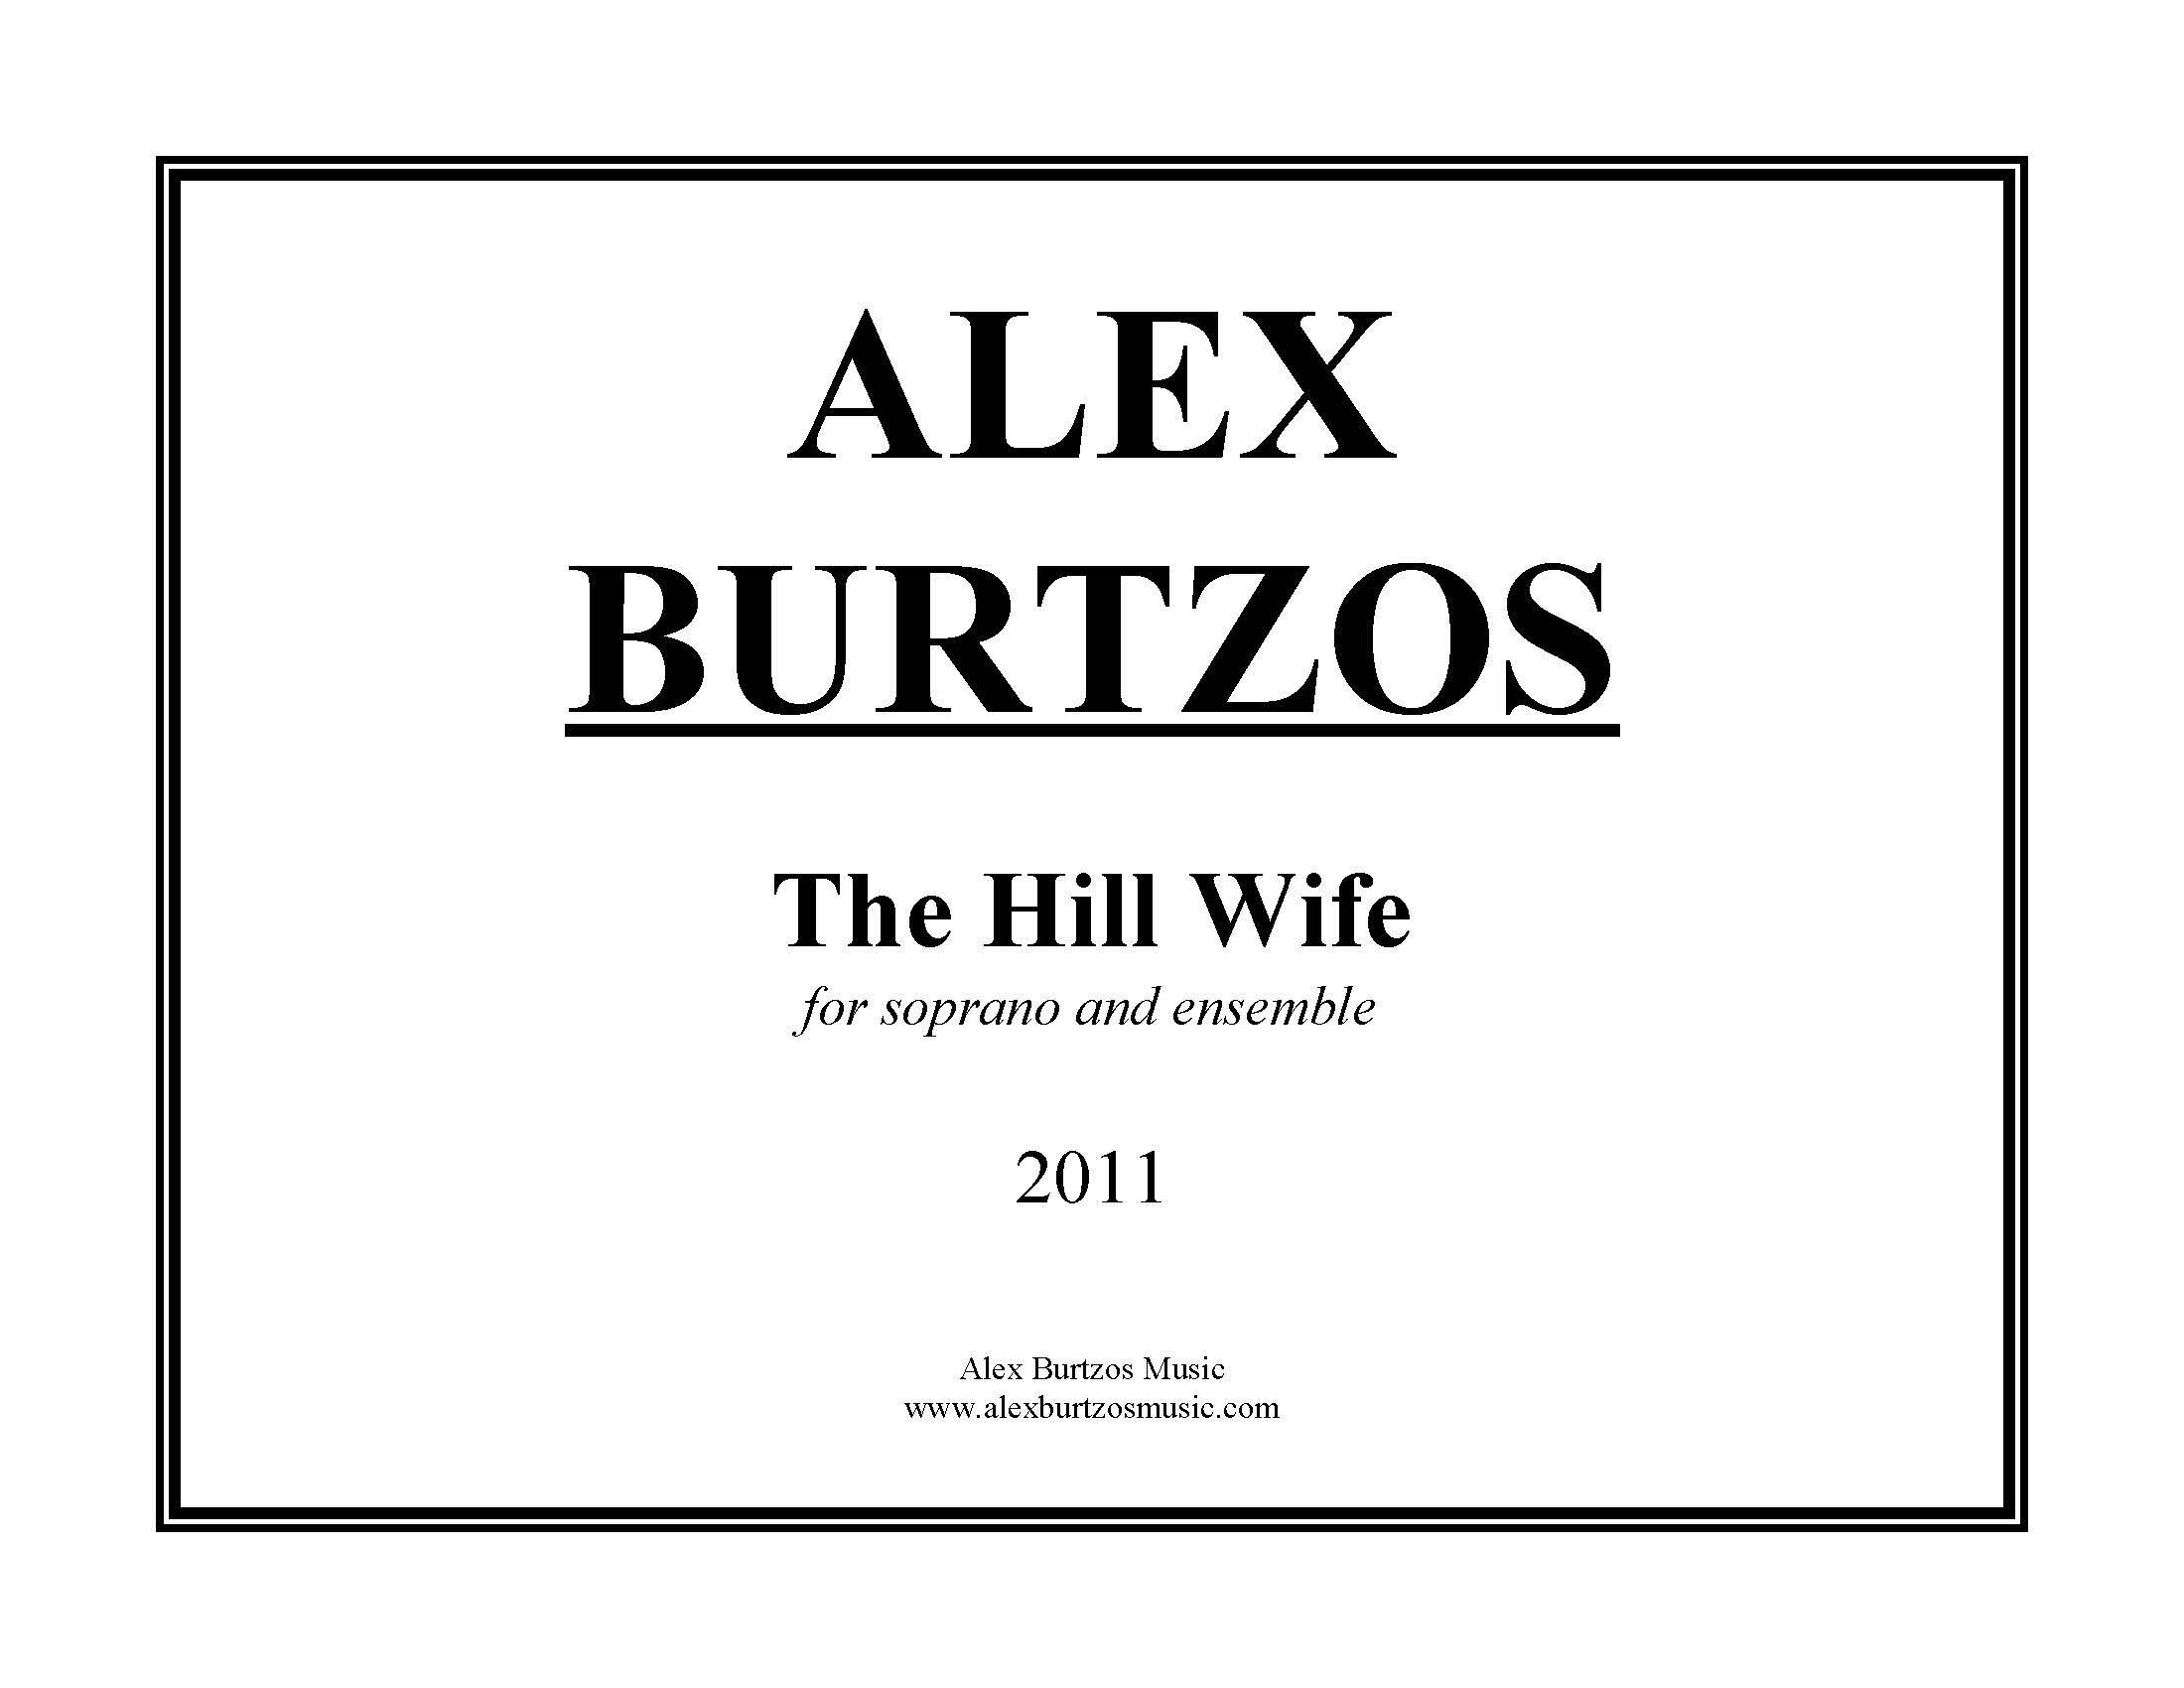 The Hill Wife - Complete Score_Page_001.jpg